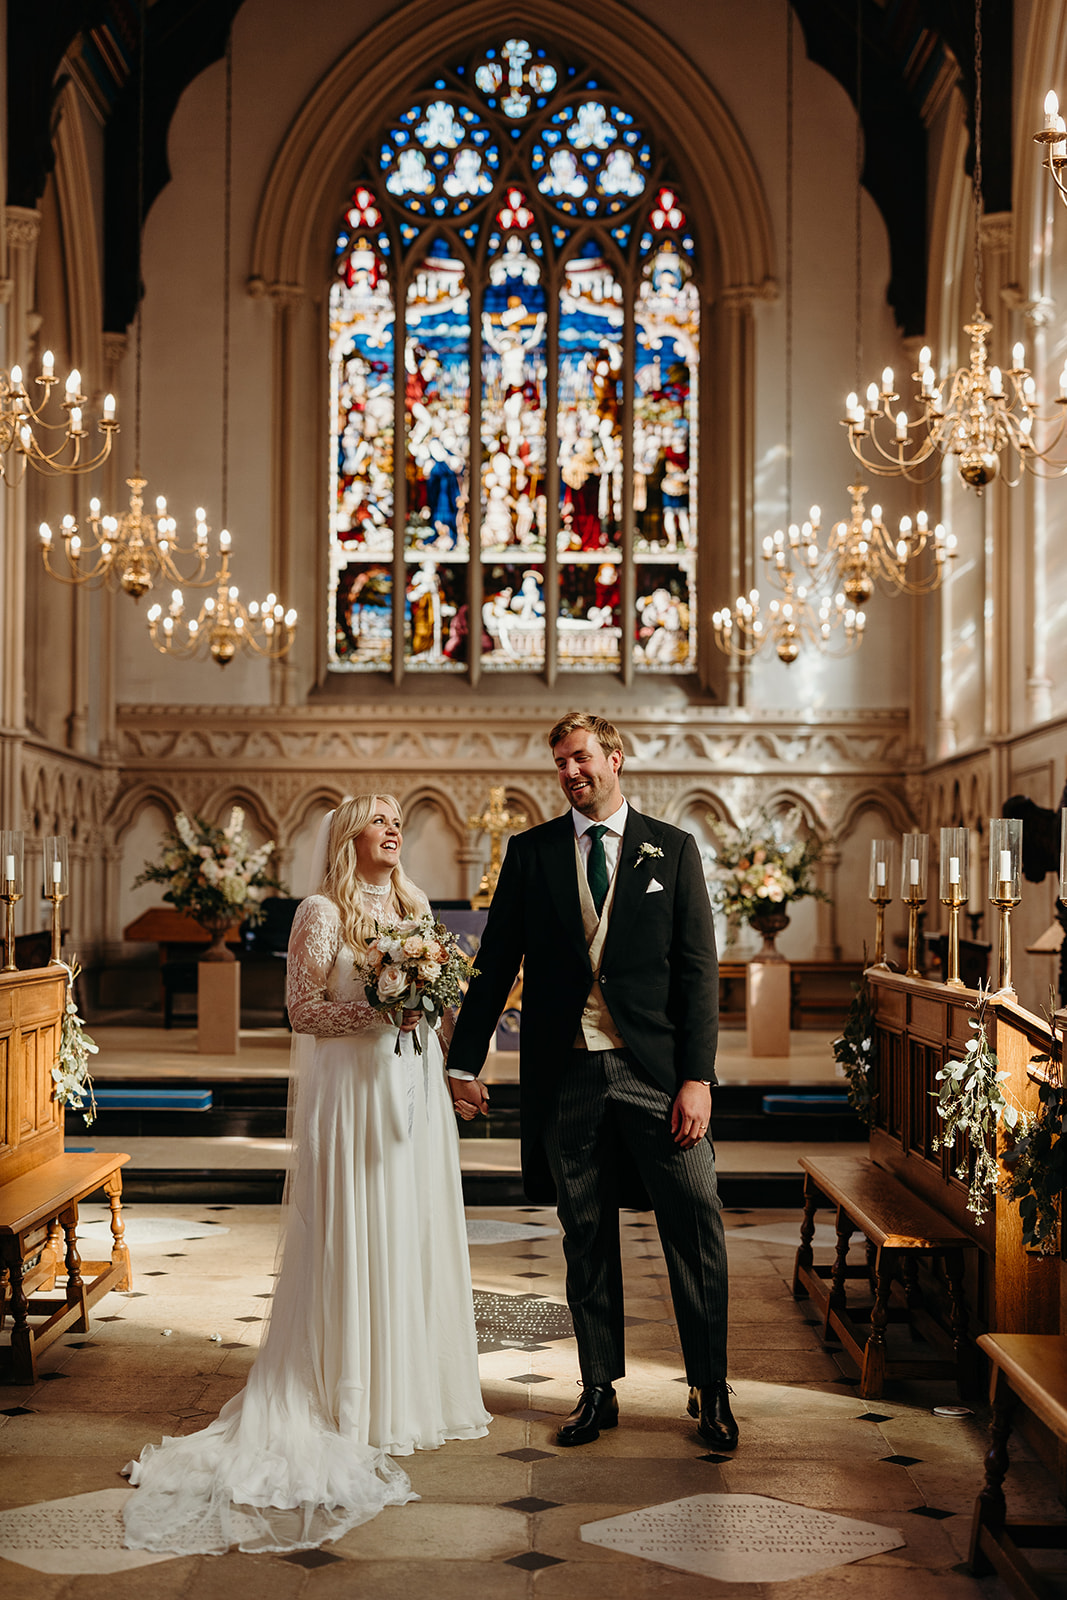 couple post after ceremony in majestic church with stained glass